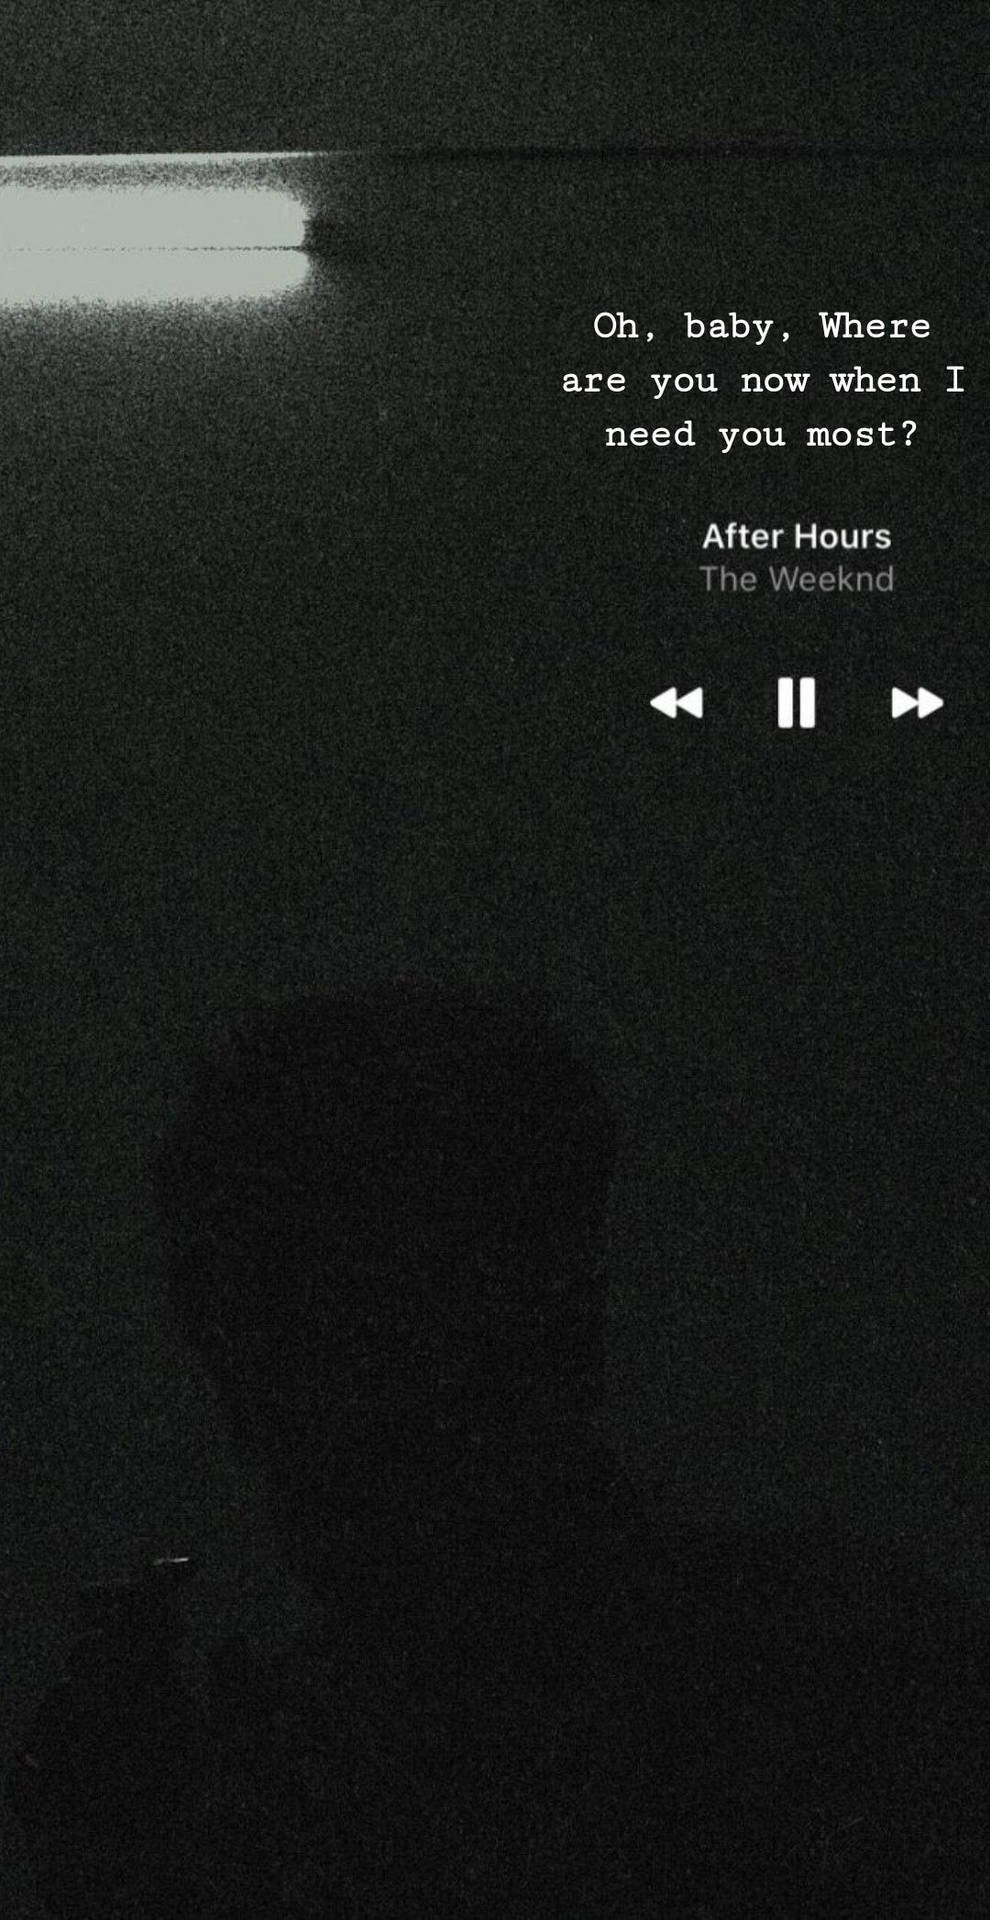 Download The Weeknd After Hours Lyrics